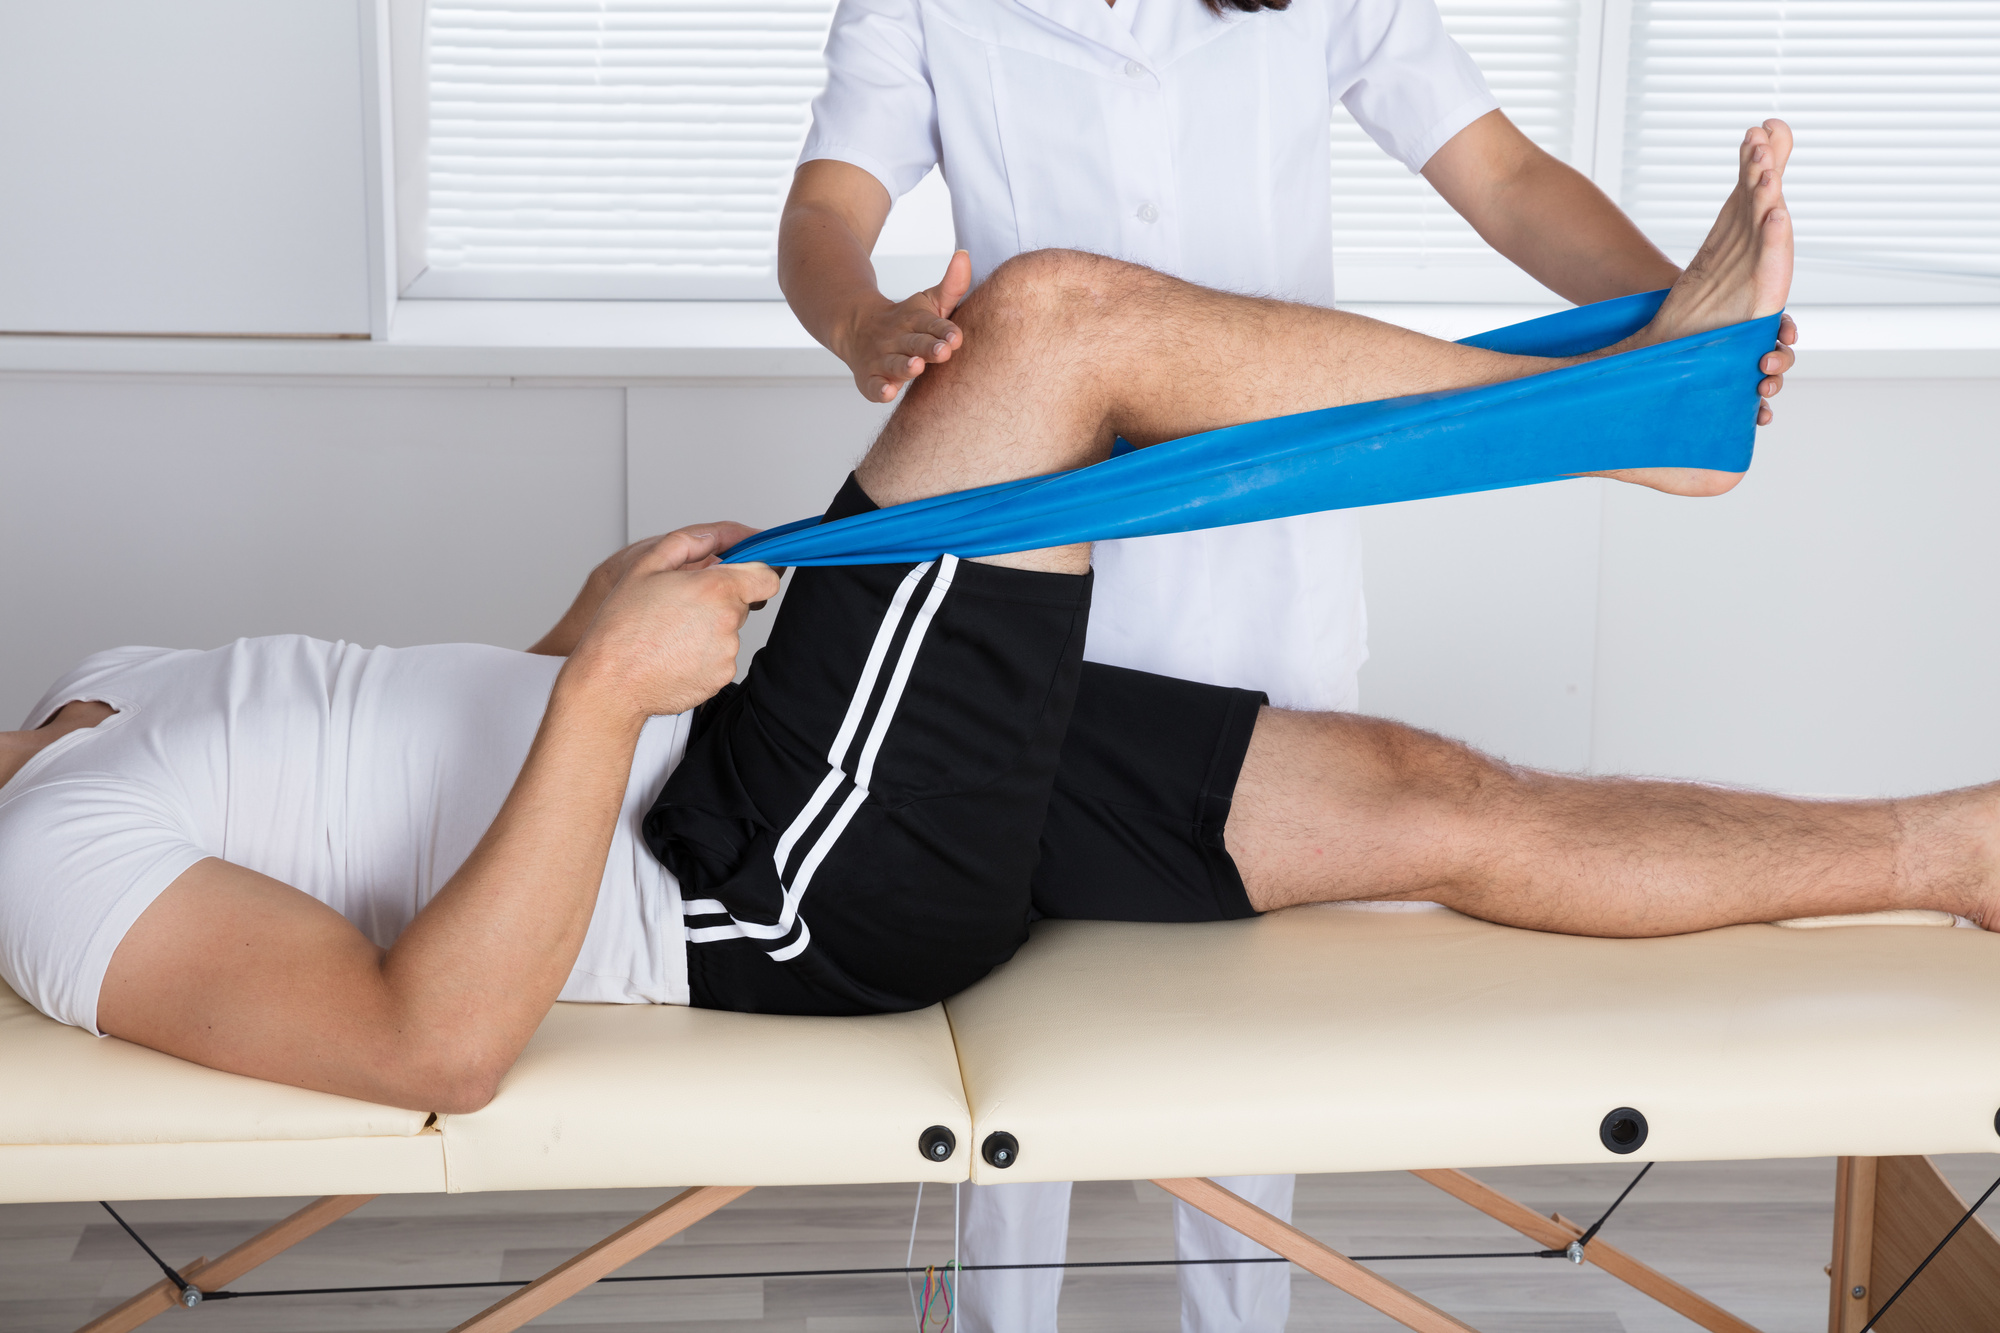 Learn More About the 6 Different Types of Physical Therapy - PDH Therapy